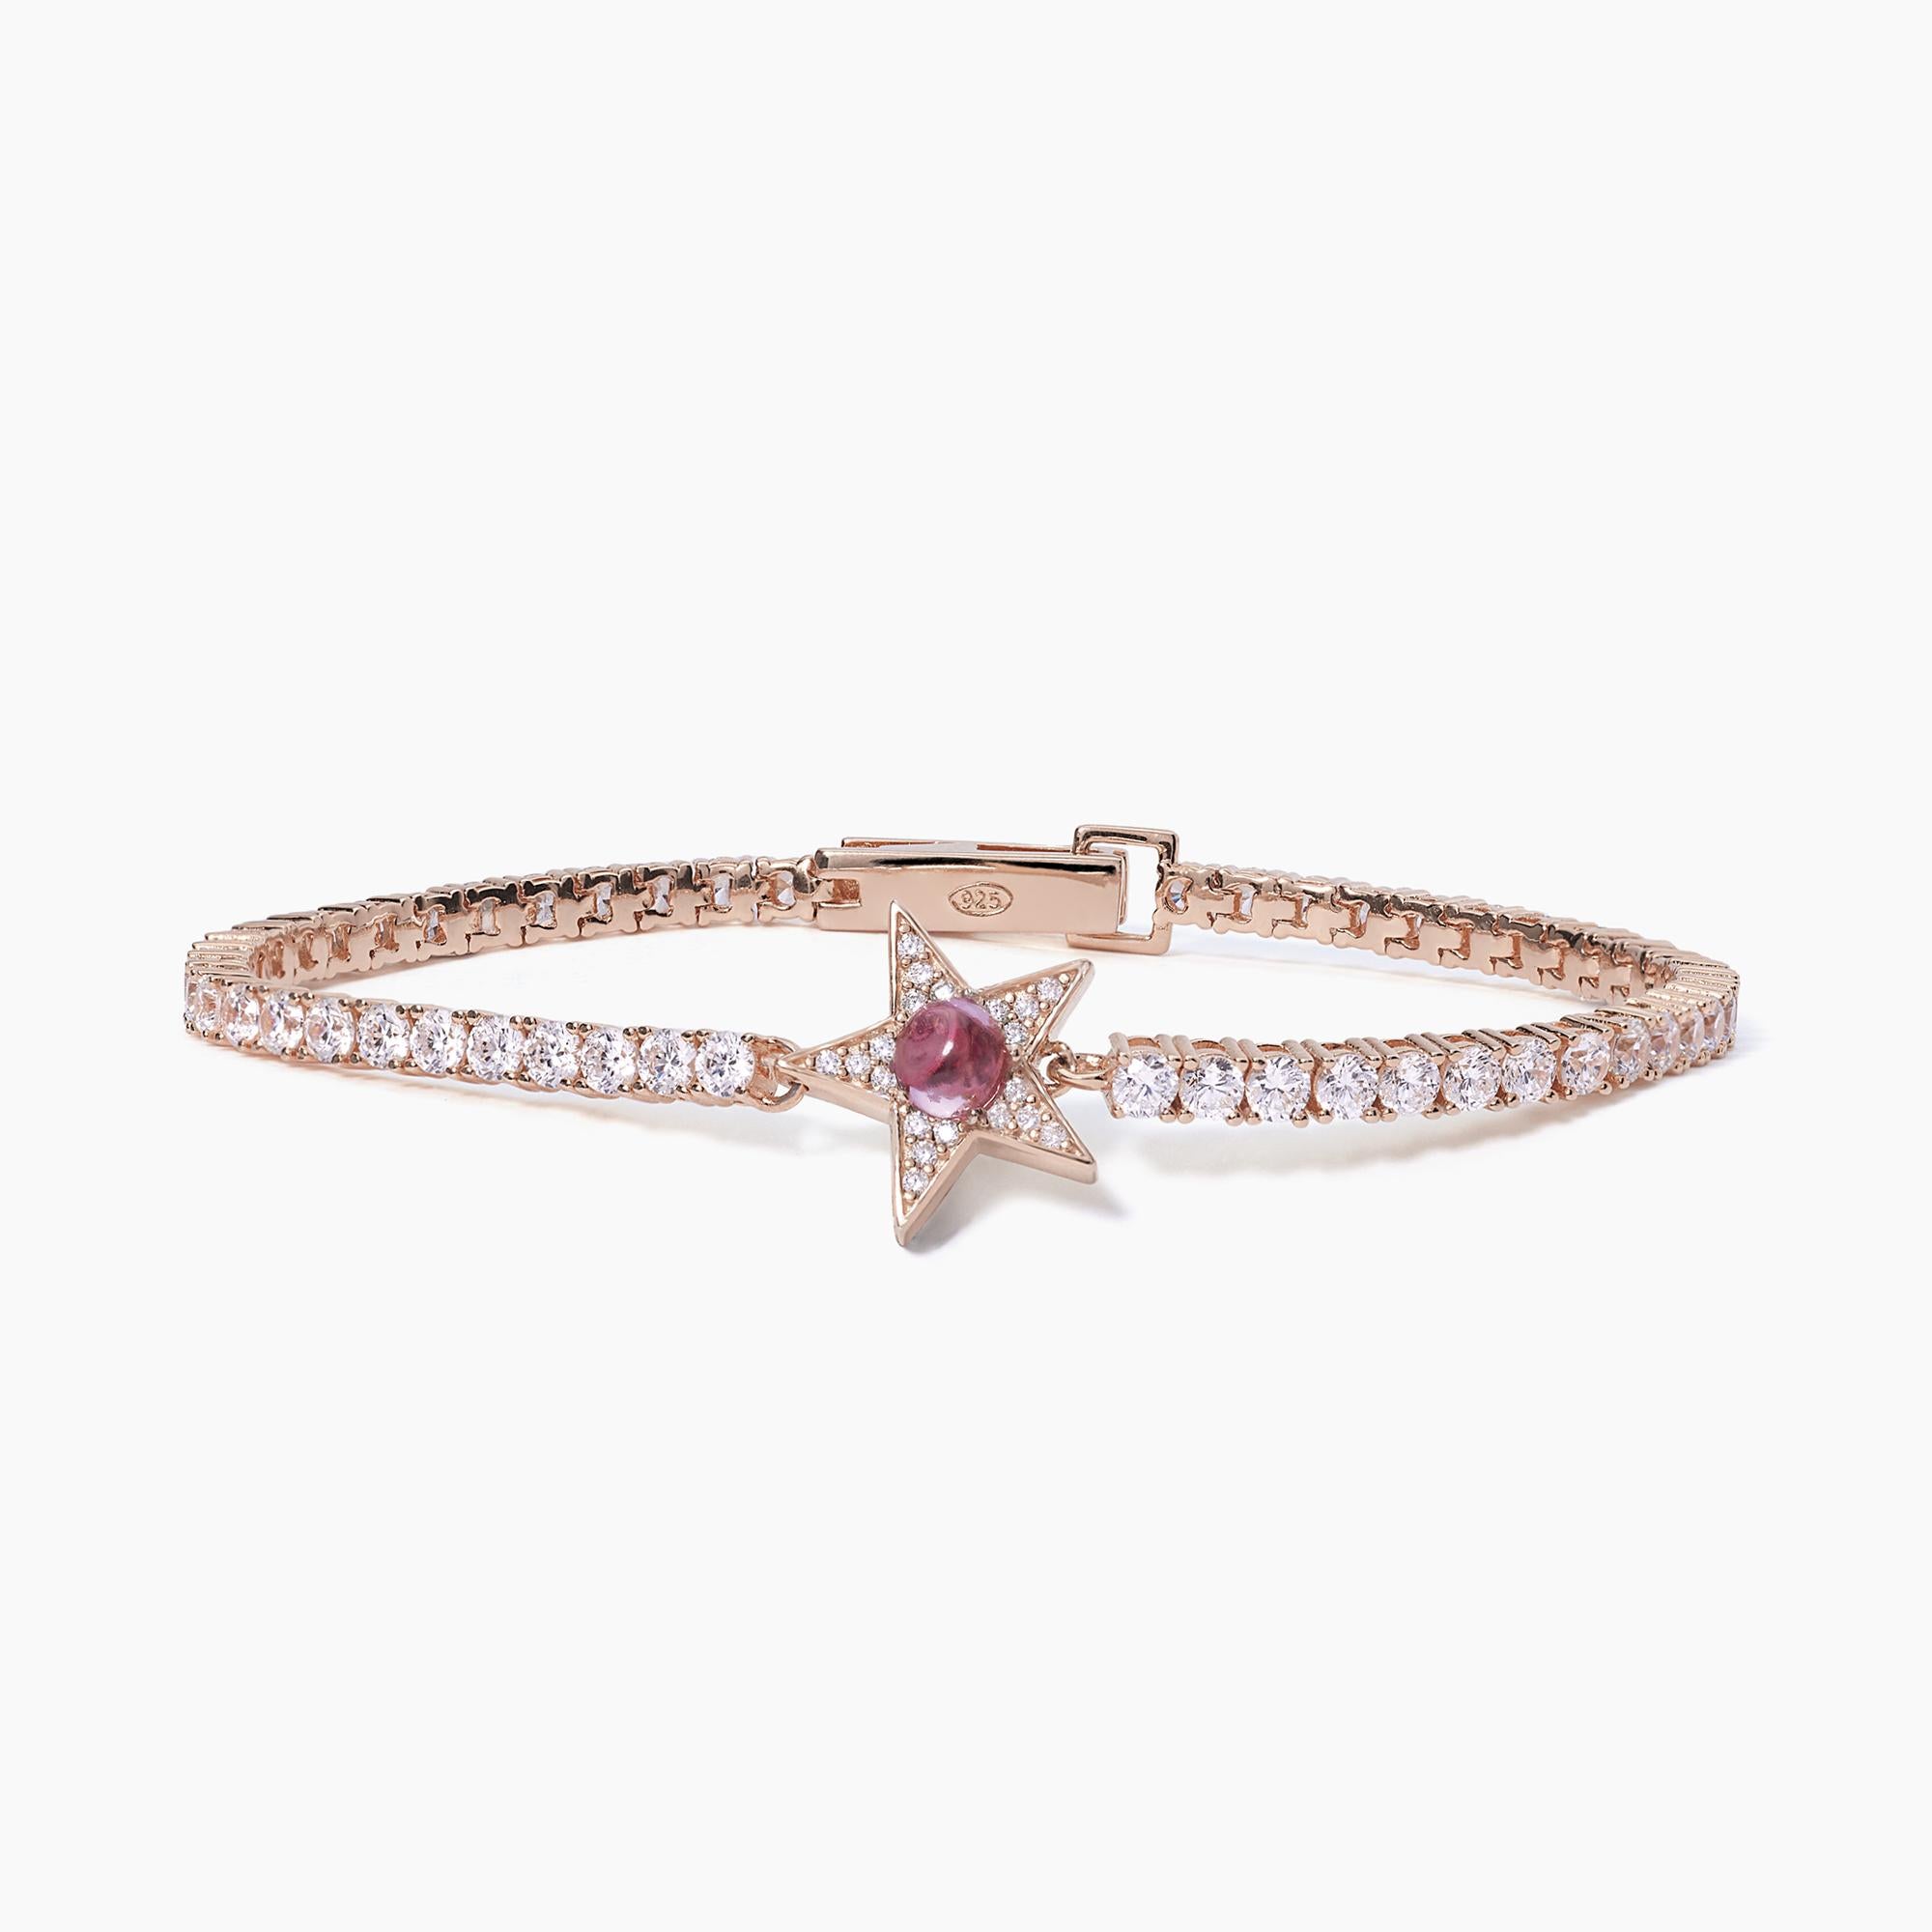 Mabina Woman - Pink star tennis bracelet with STARLET synthetic tourmaline - 533652-S